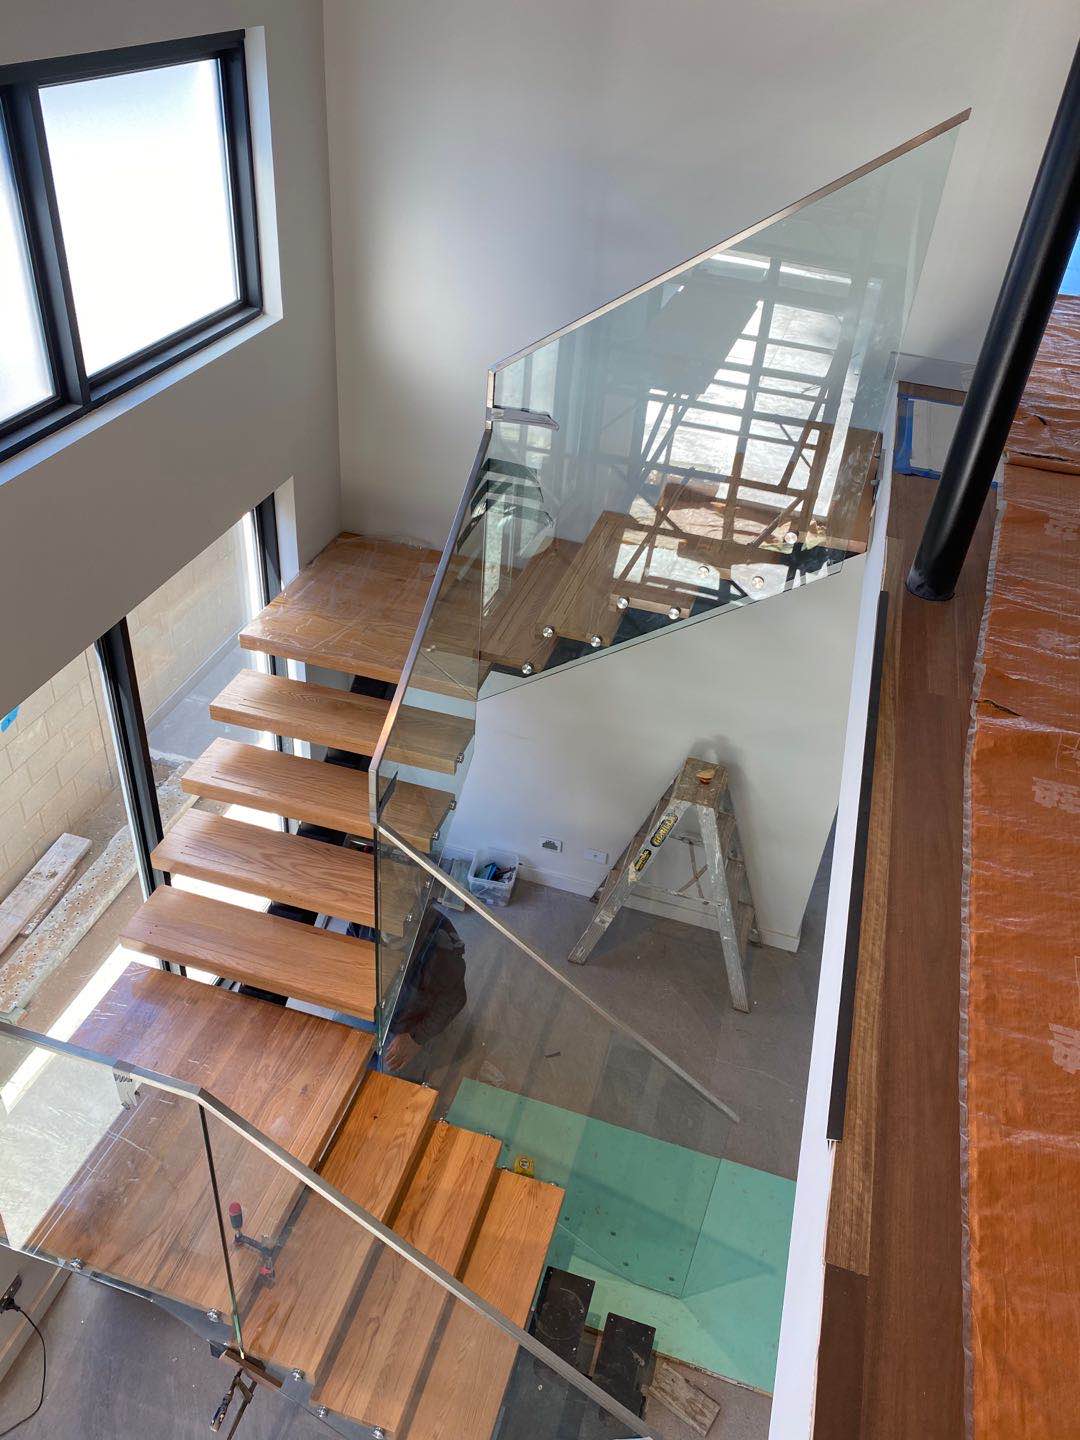 Top internal stairs for aprtment-10